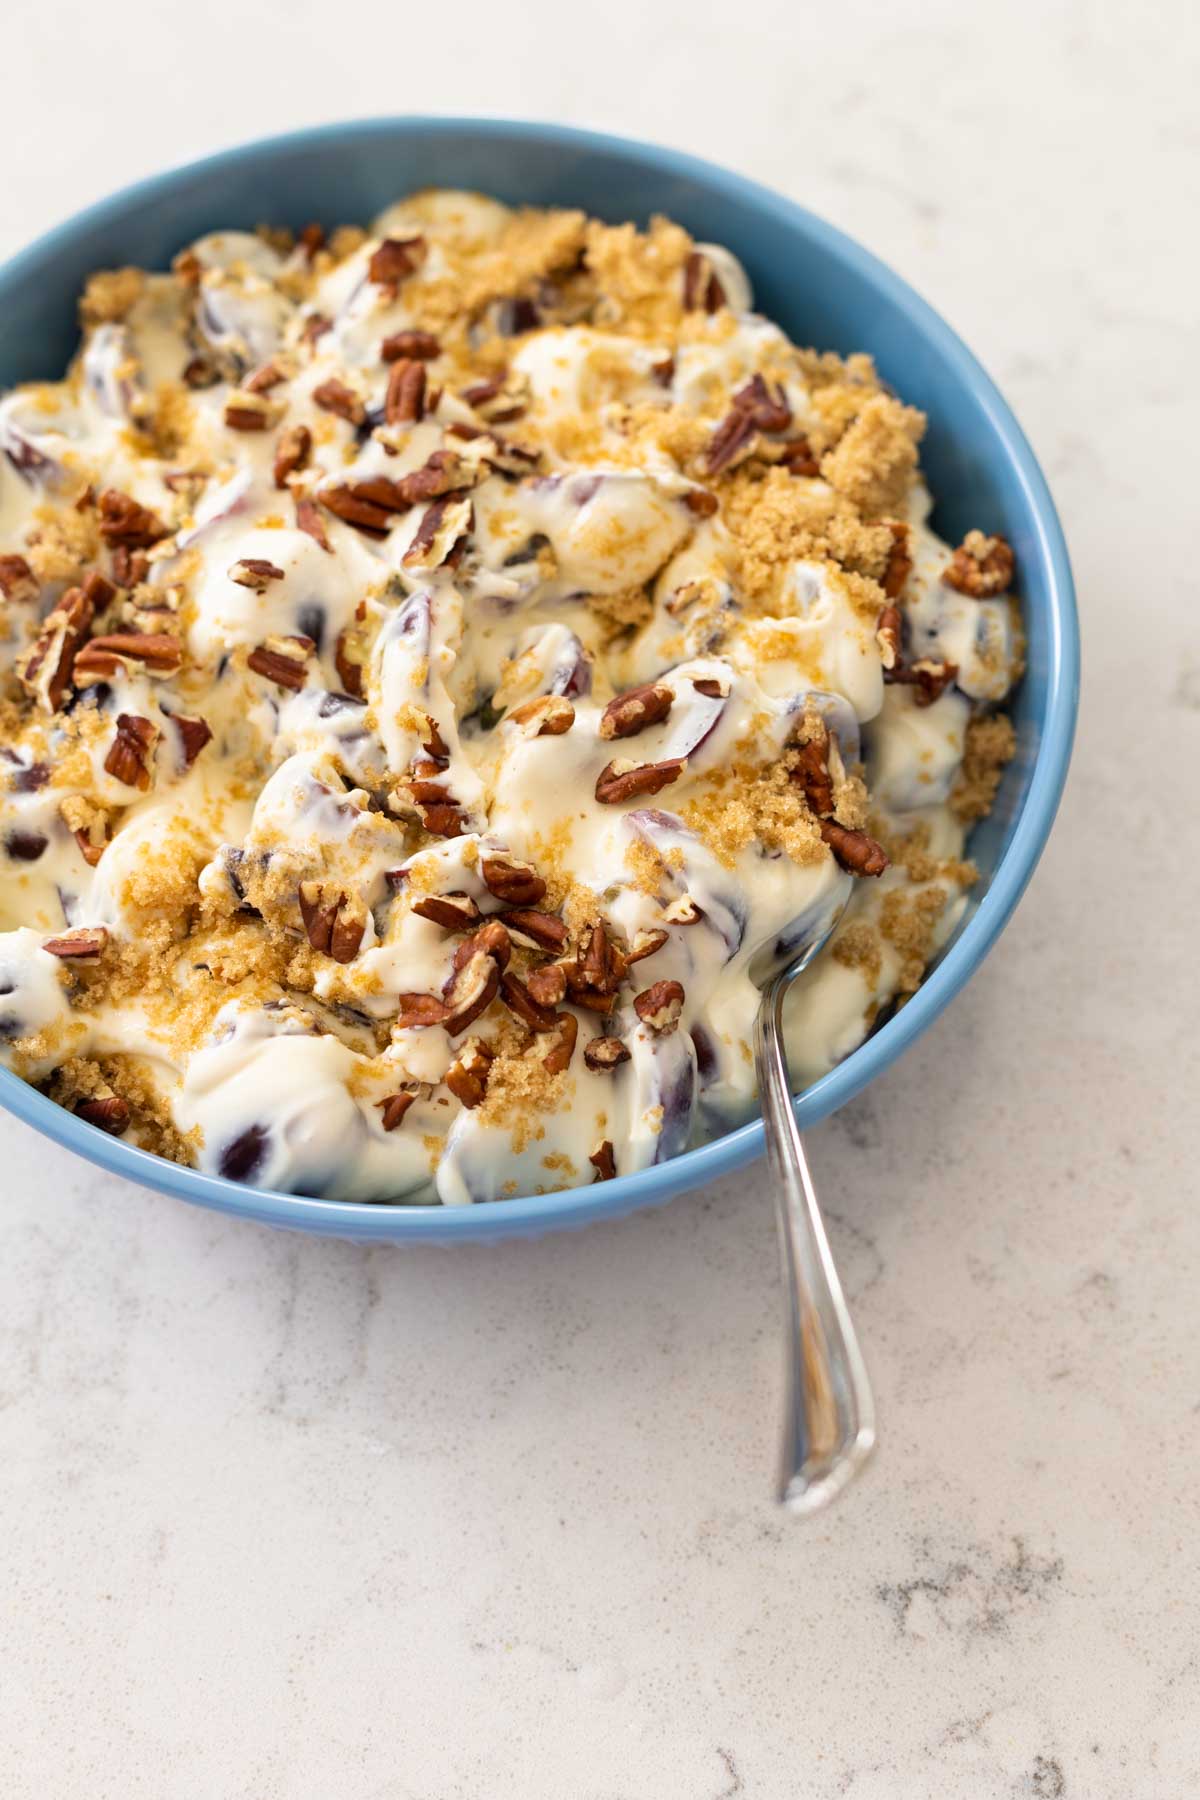 The grape salad has been topped with crumbled brown sugar and chopped pecans. 